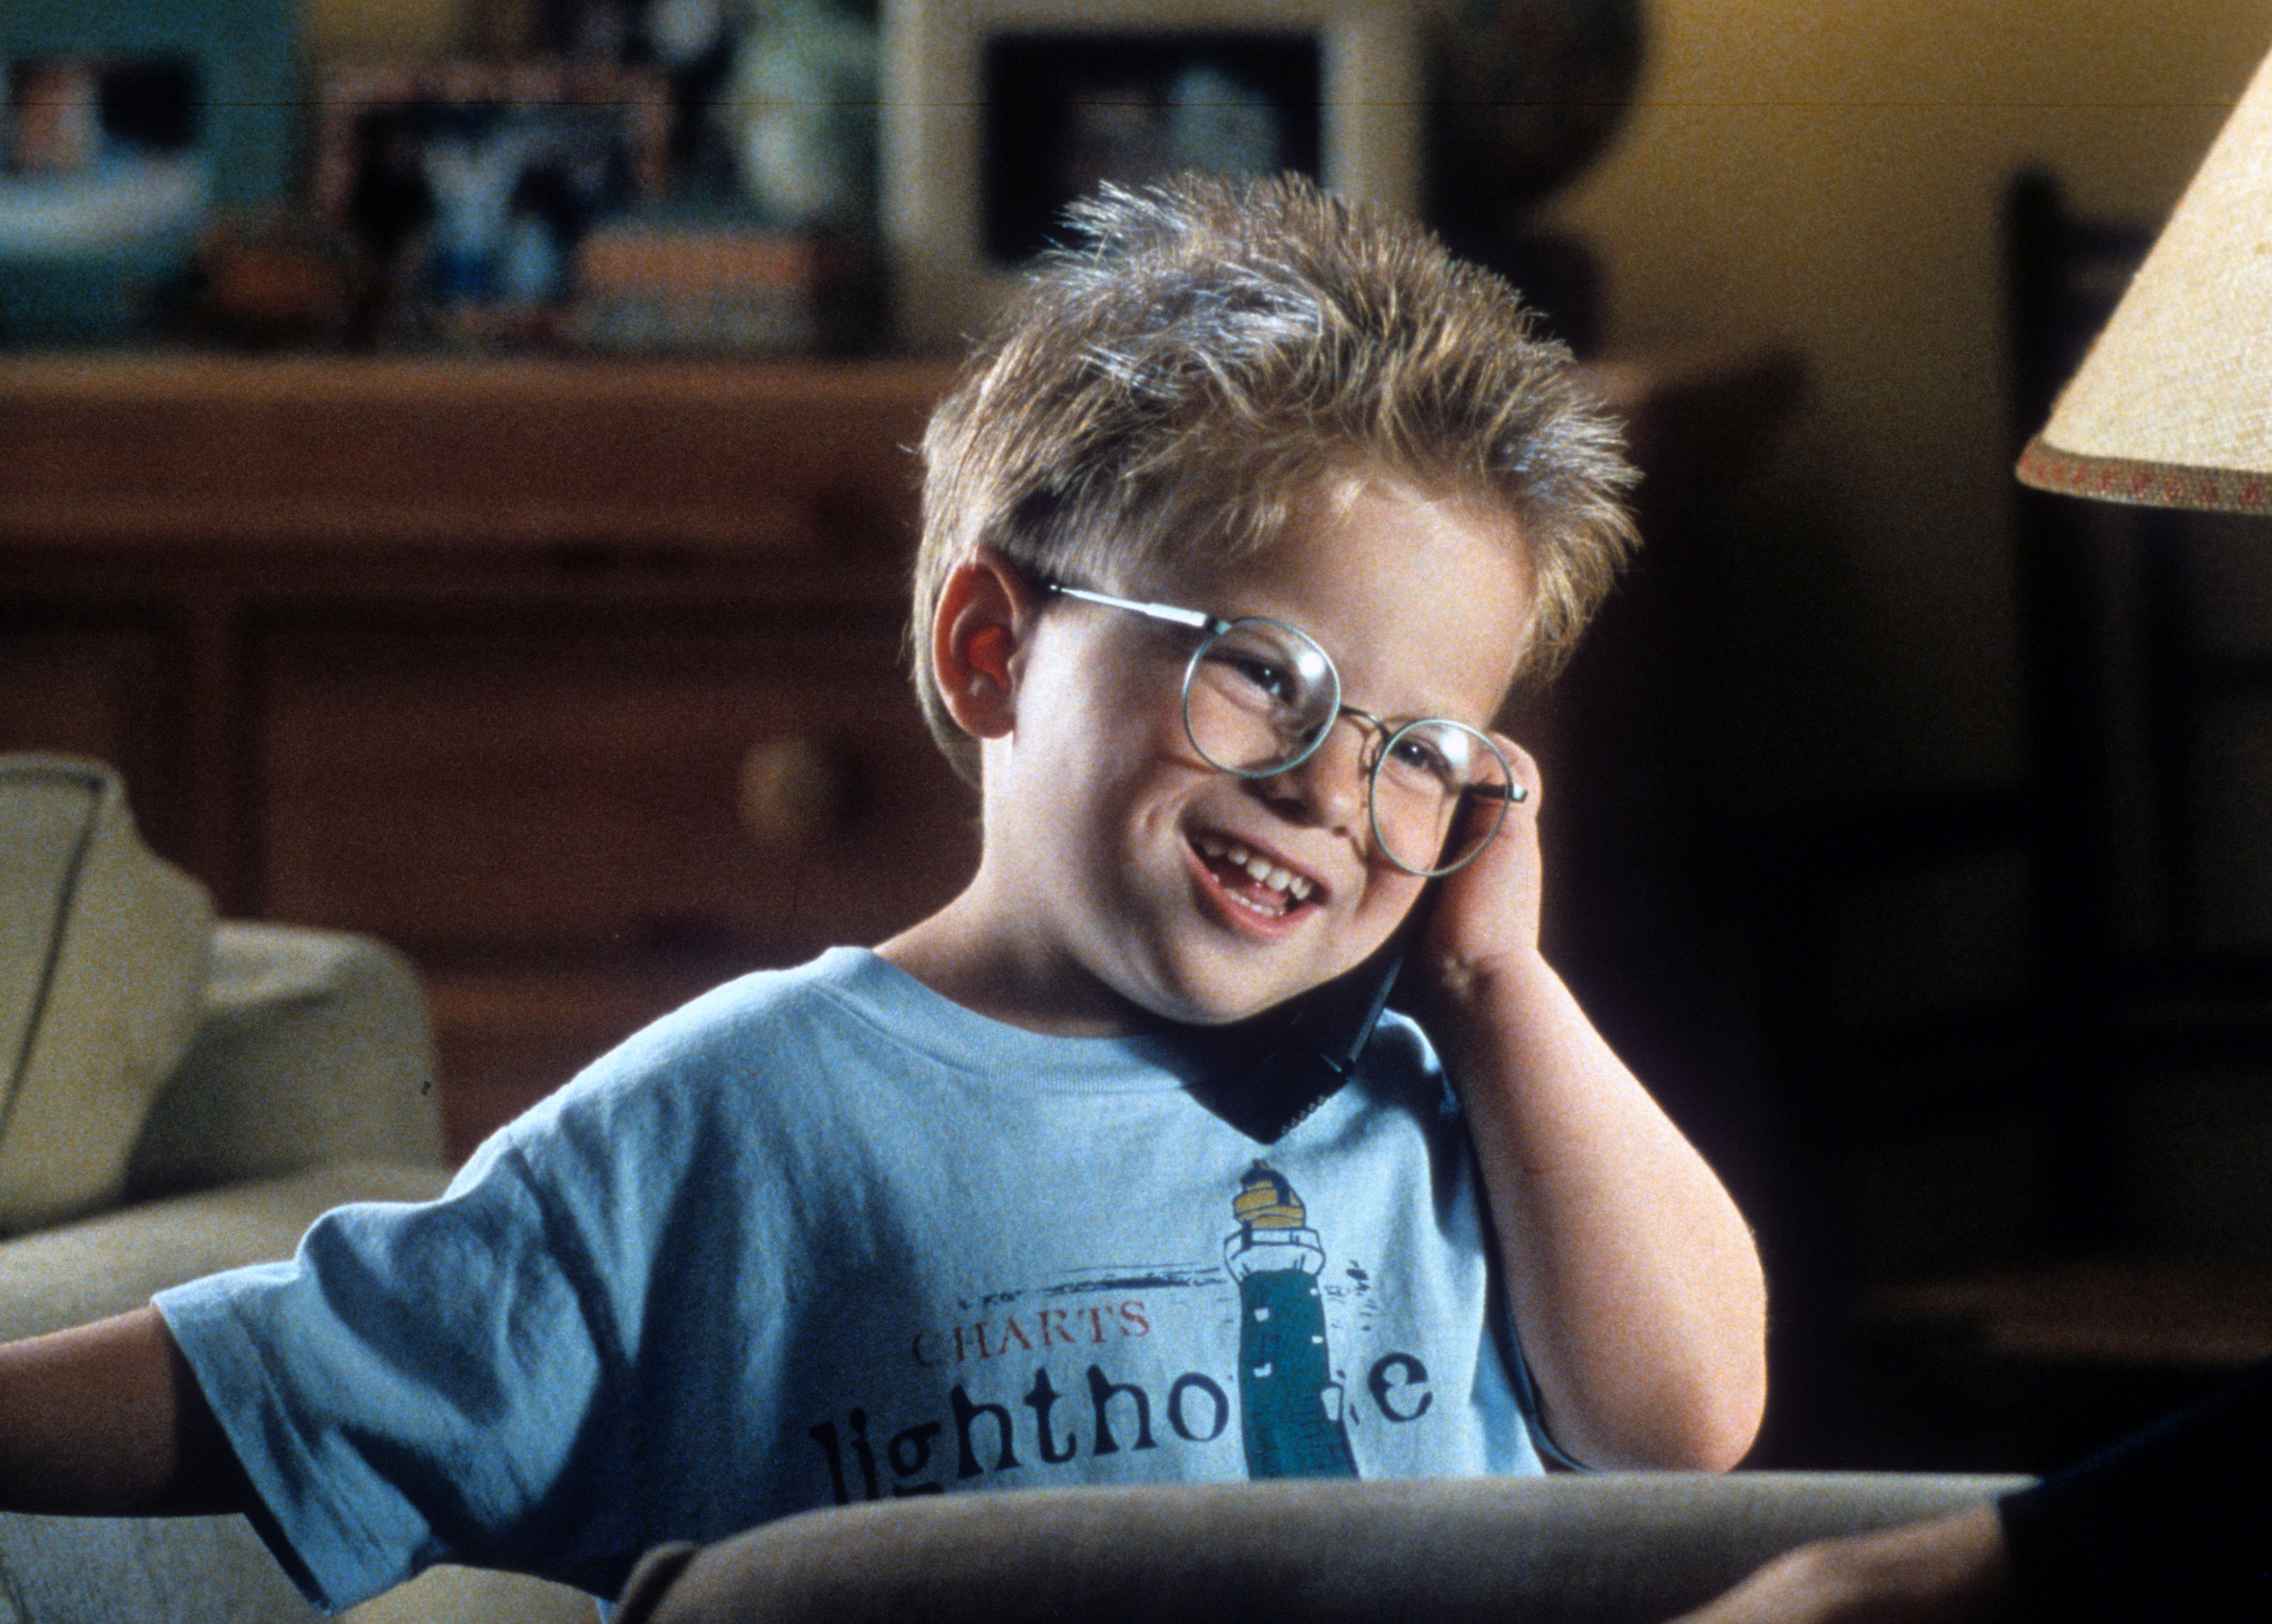 Jonathan Lipnicki talks on a phone in a scene from the film 'Jerry Maguire', 1996. (Columbia TriStar&mdash;Getty Images)